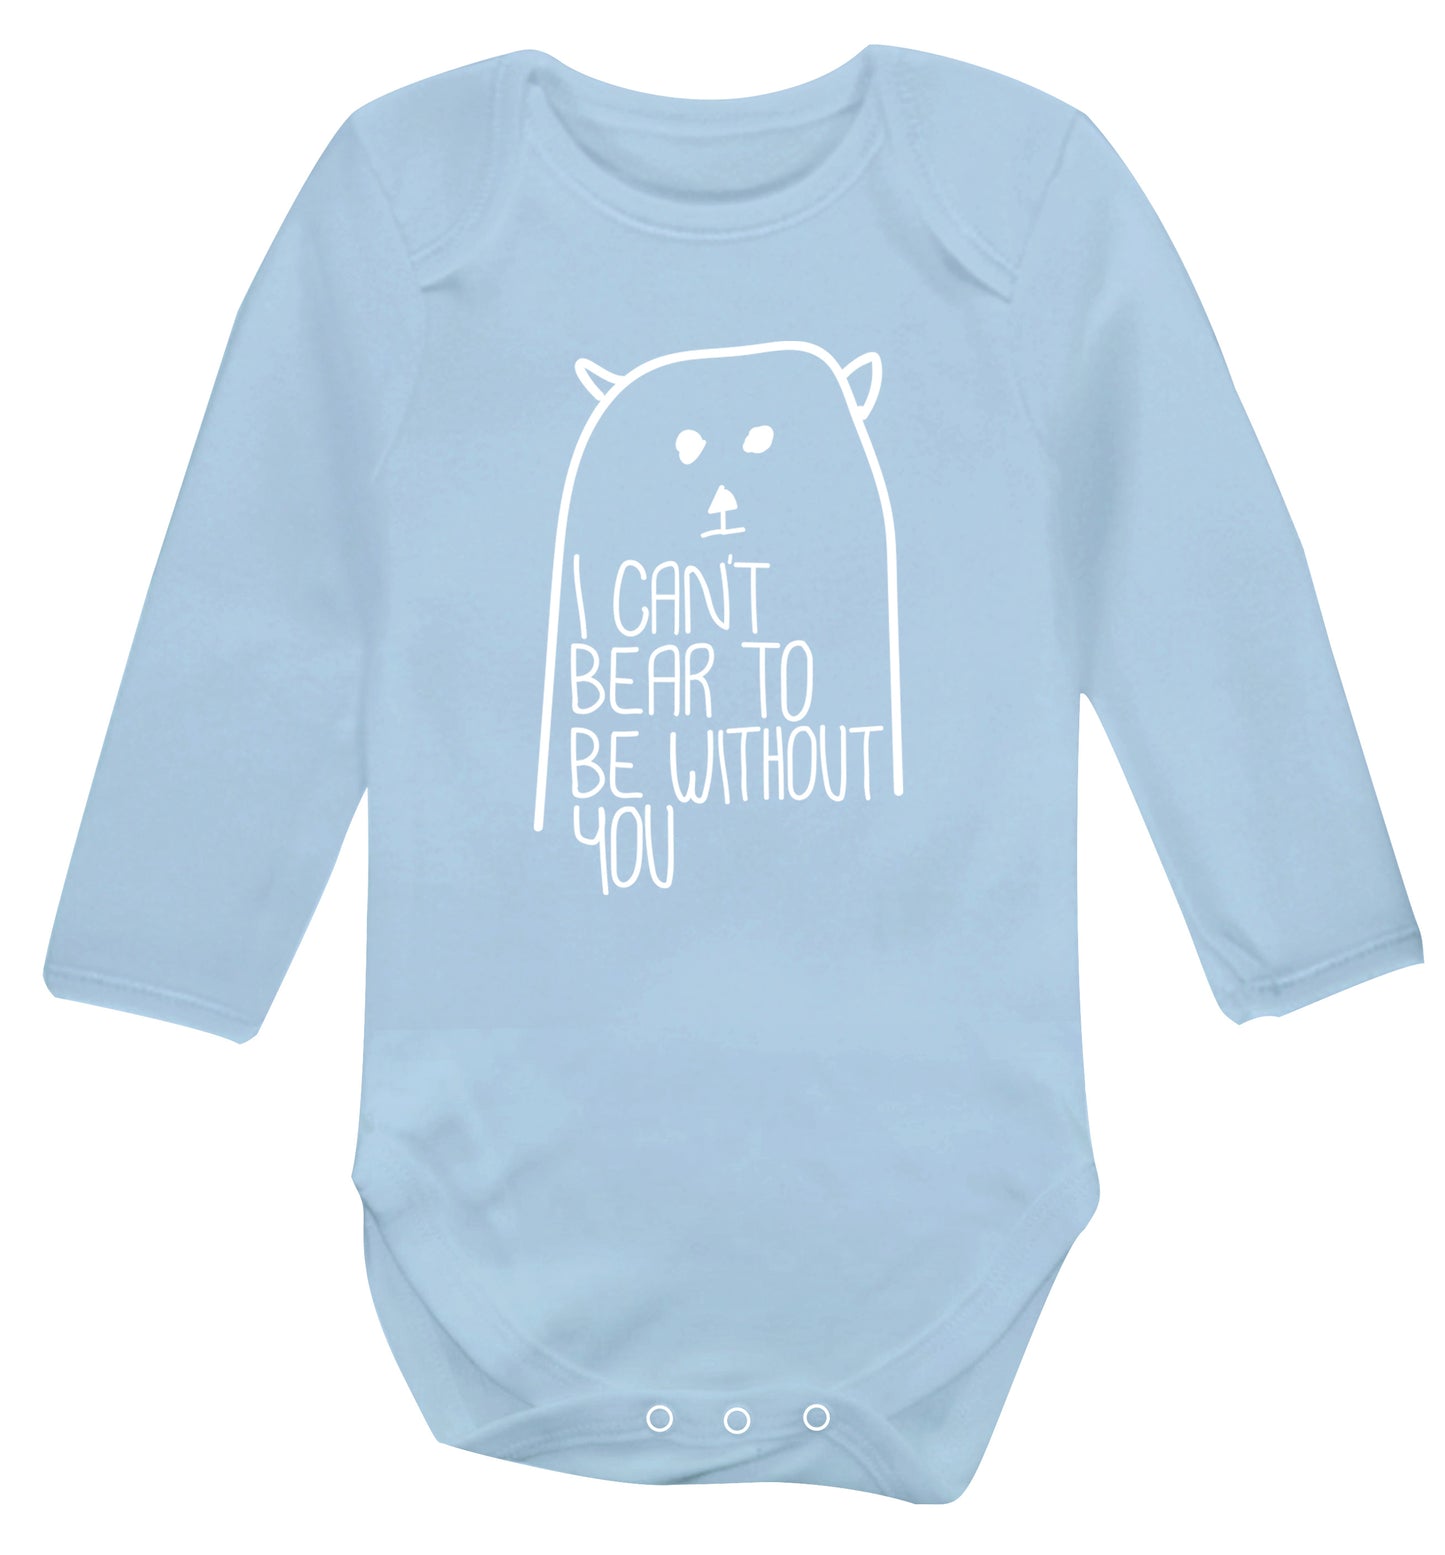 I can't bear to be without you Baby Vest long sleeved pale blue 6-12 months